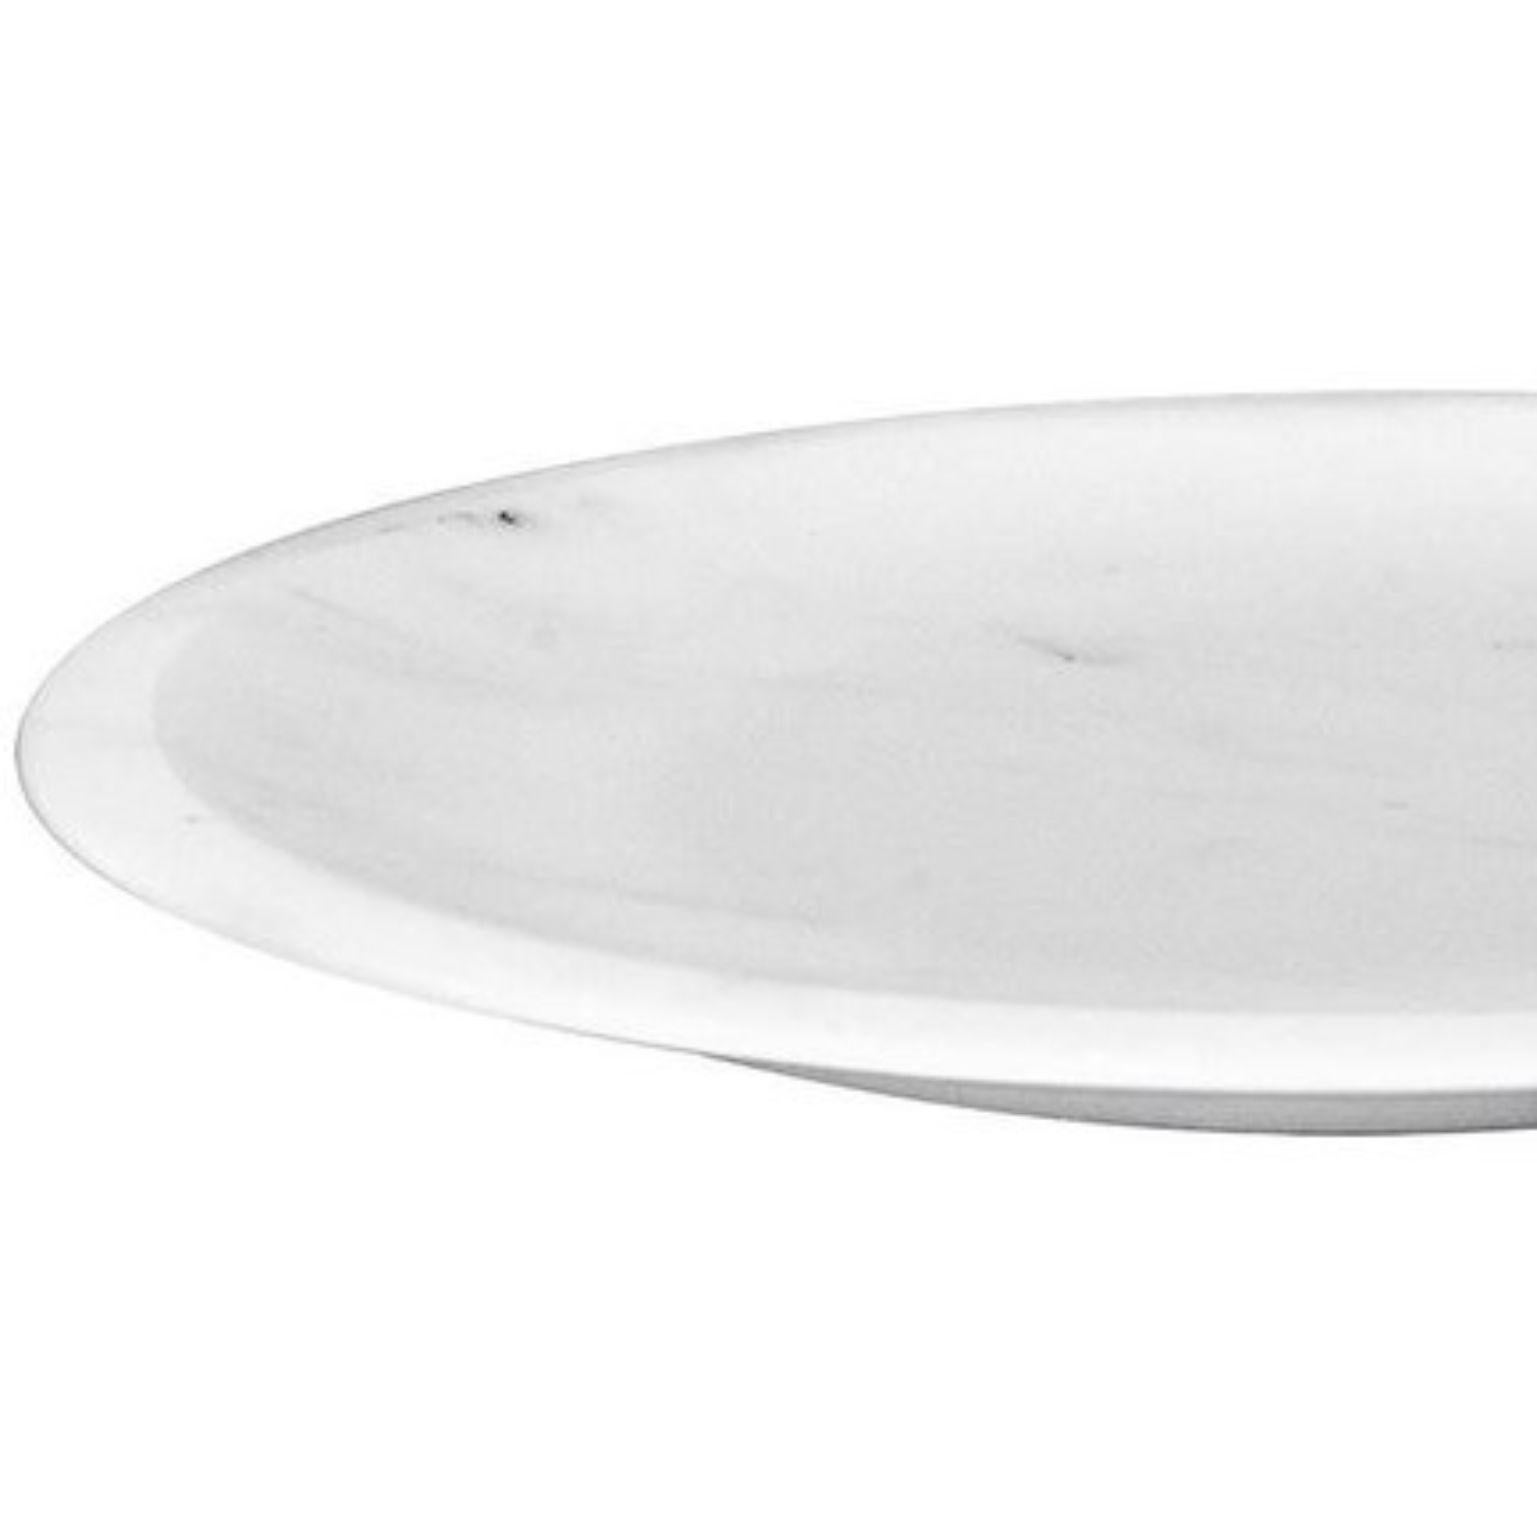 Piatto Piano #1 - dining plate - white by Ivan Colominas
Materia e Tavola Collection
Dimensions: 25 x 2 cm
Materials: Bianco Michelangelo / Bianco Carrara

Also available: Nero Marquinia

The collection is a tribute to one of Italy’s great